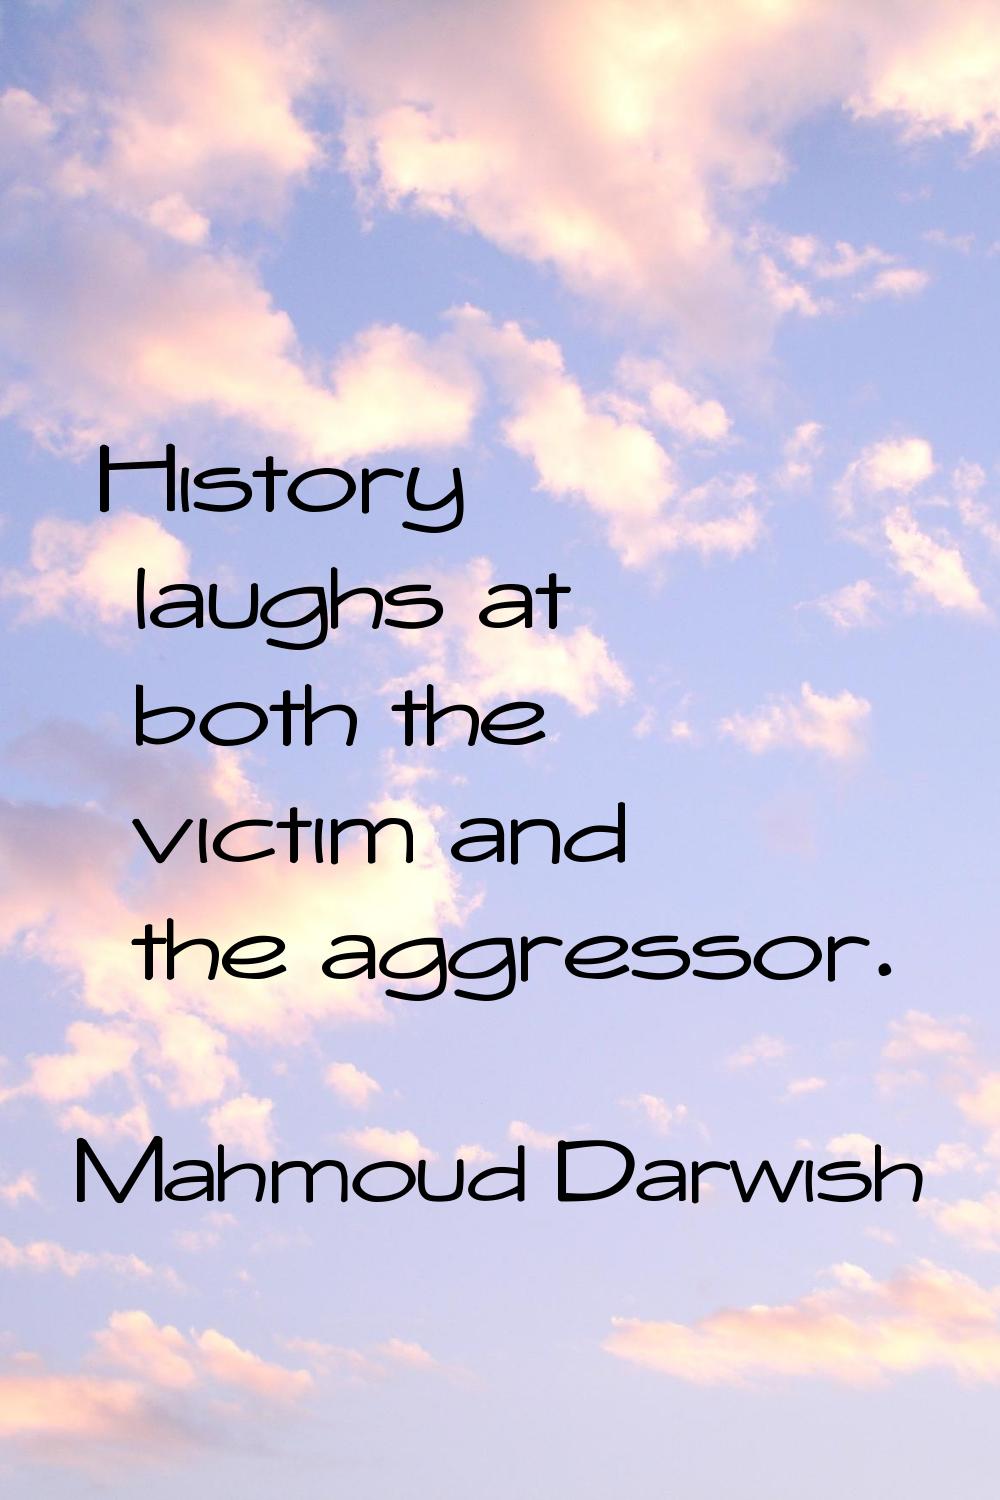 History laughs at both the victim and the aggressor.